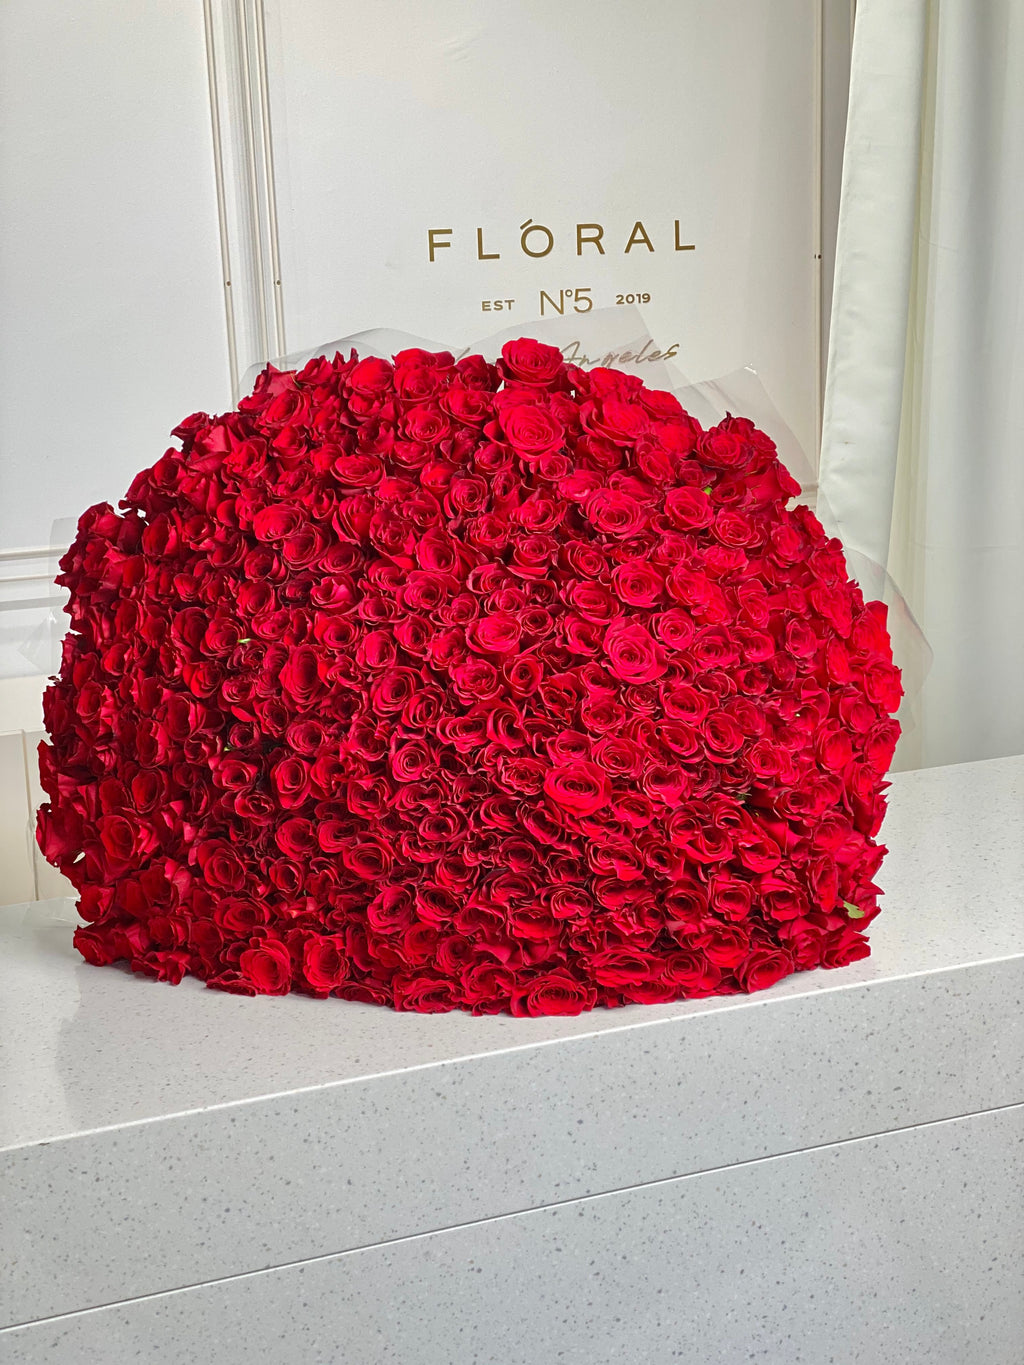 Floral N5  NO.123 - GIANT RED BABY BREATH BOUQUET